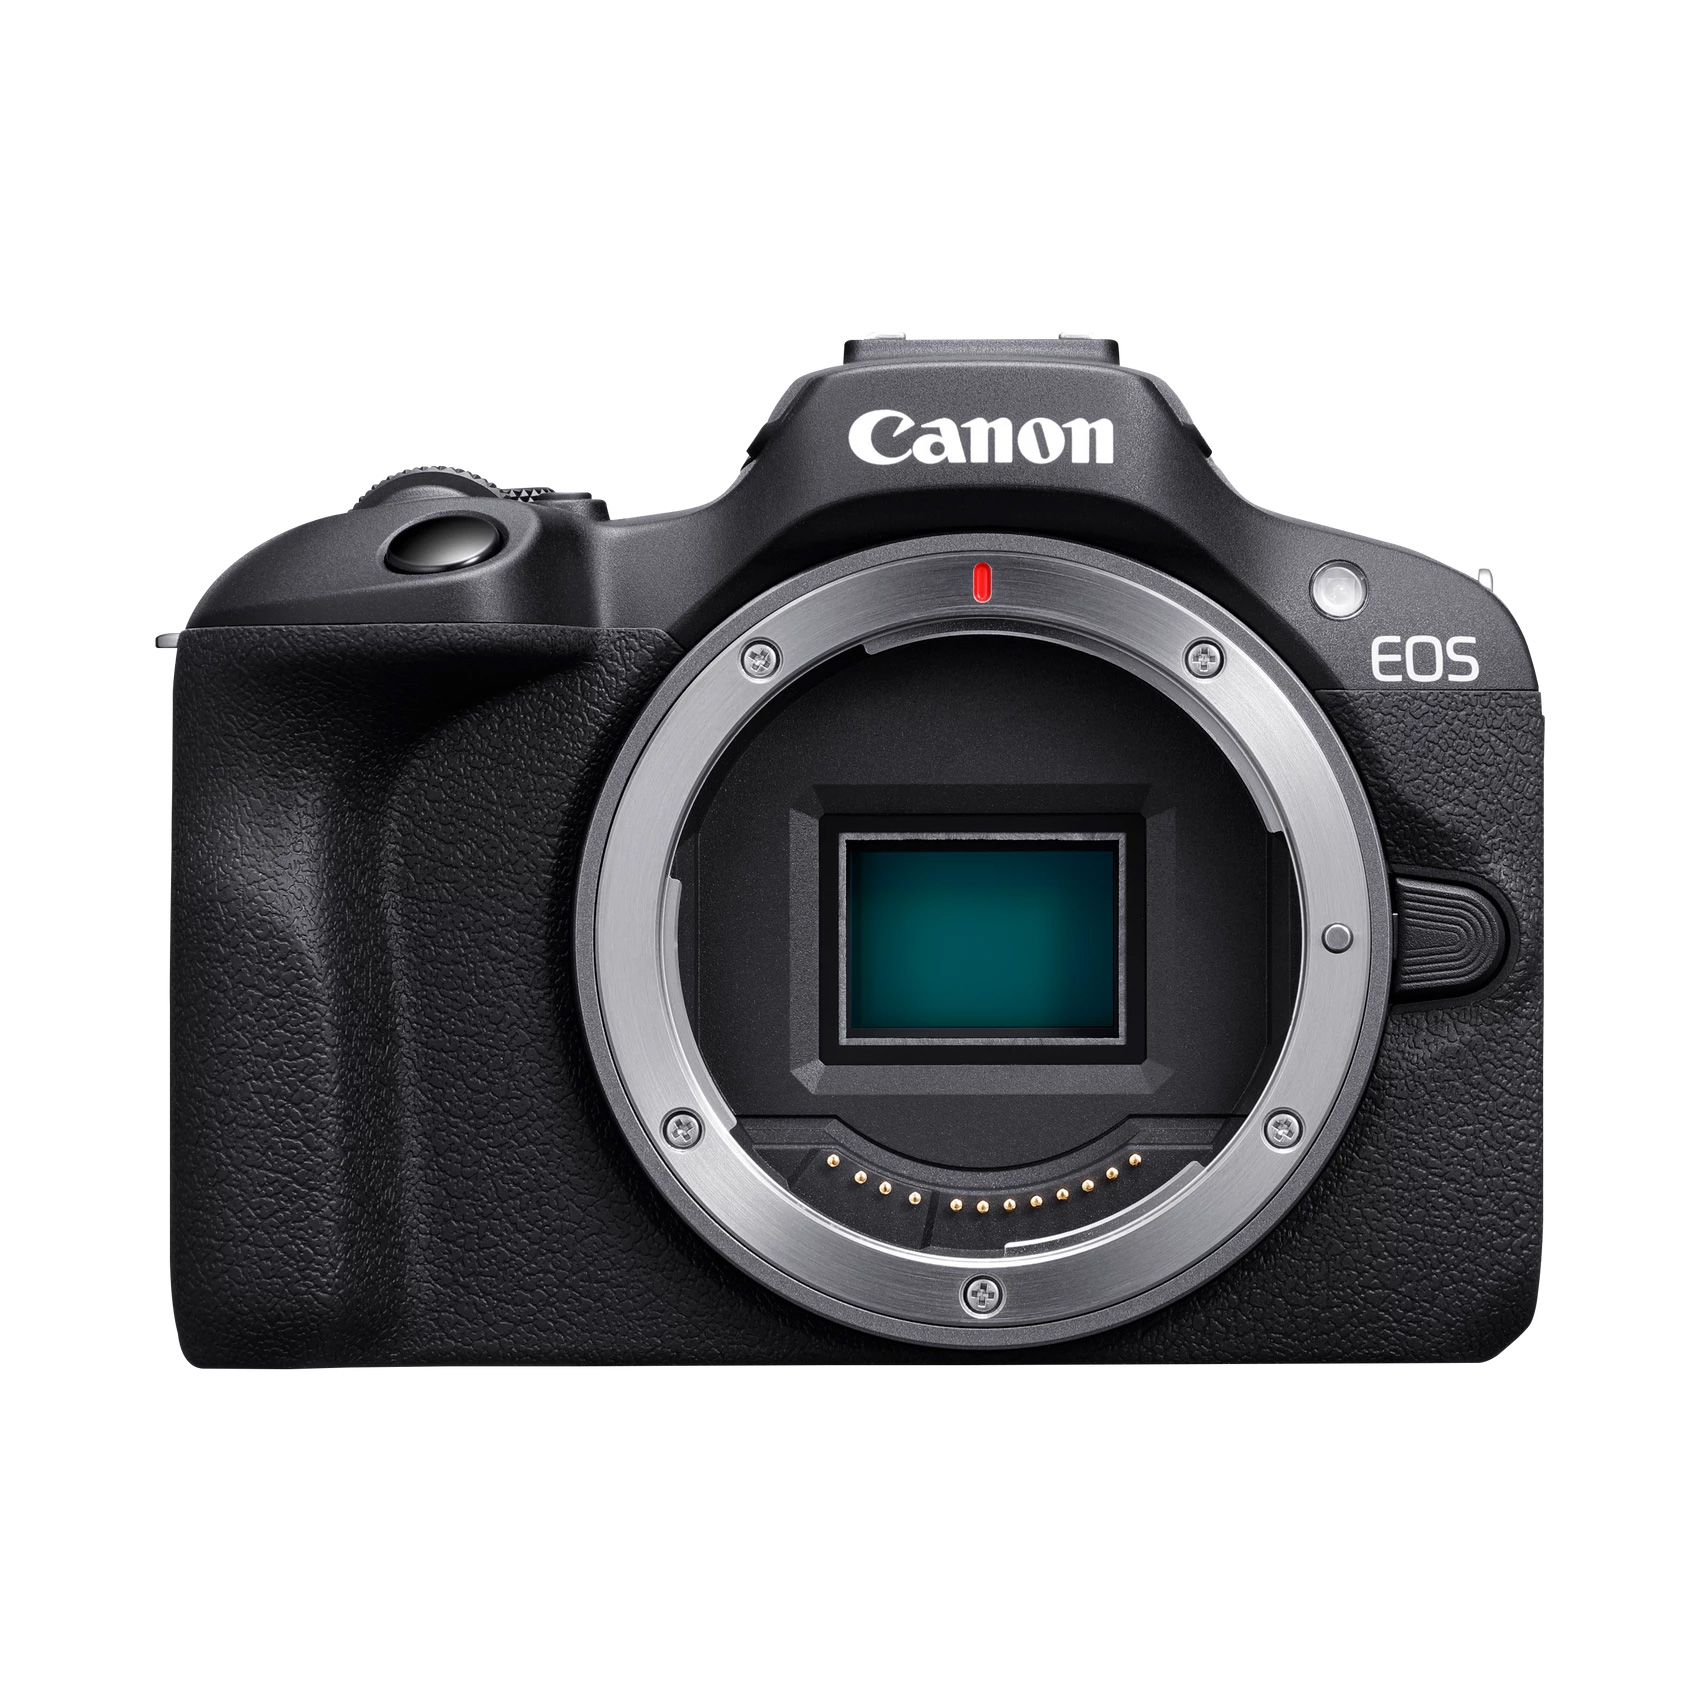 Canon introduces smartphone competitor Canon EOS R100 with APS-C sensor and 4K video 